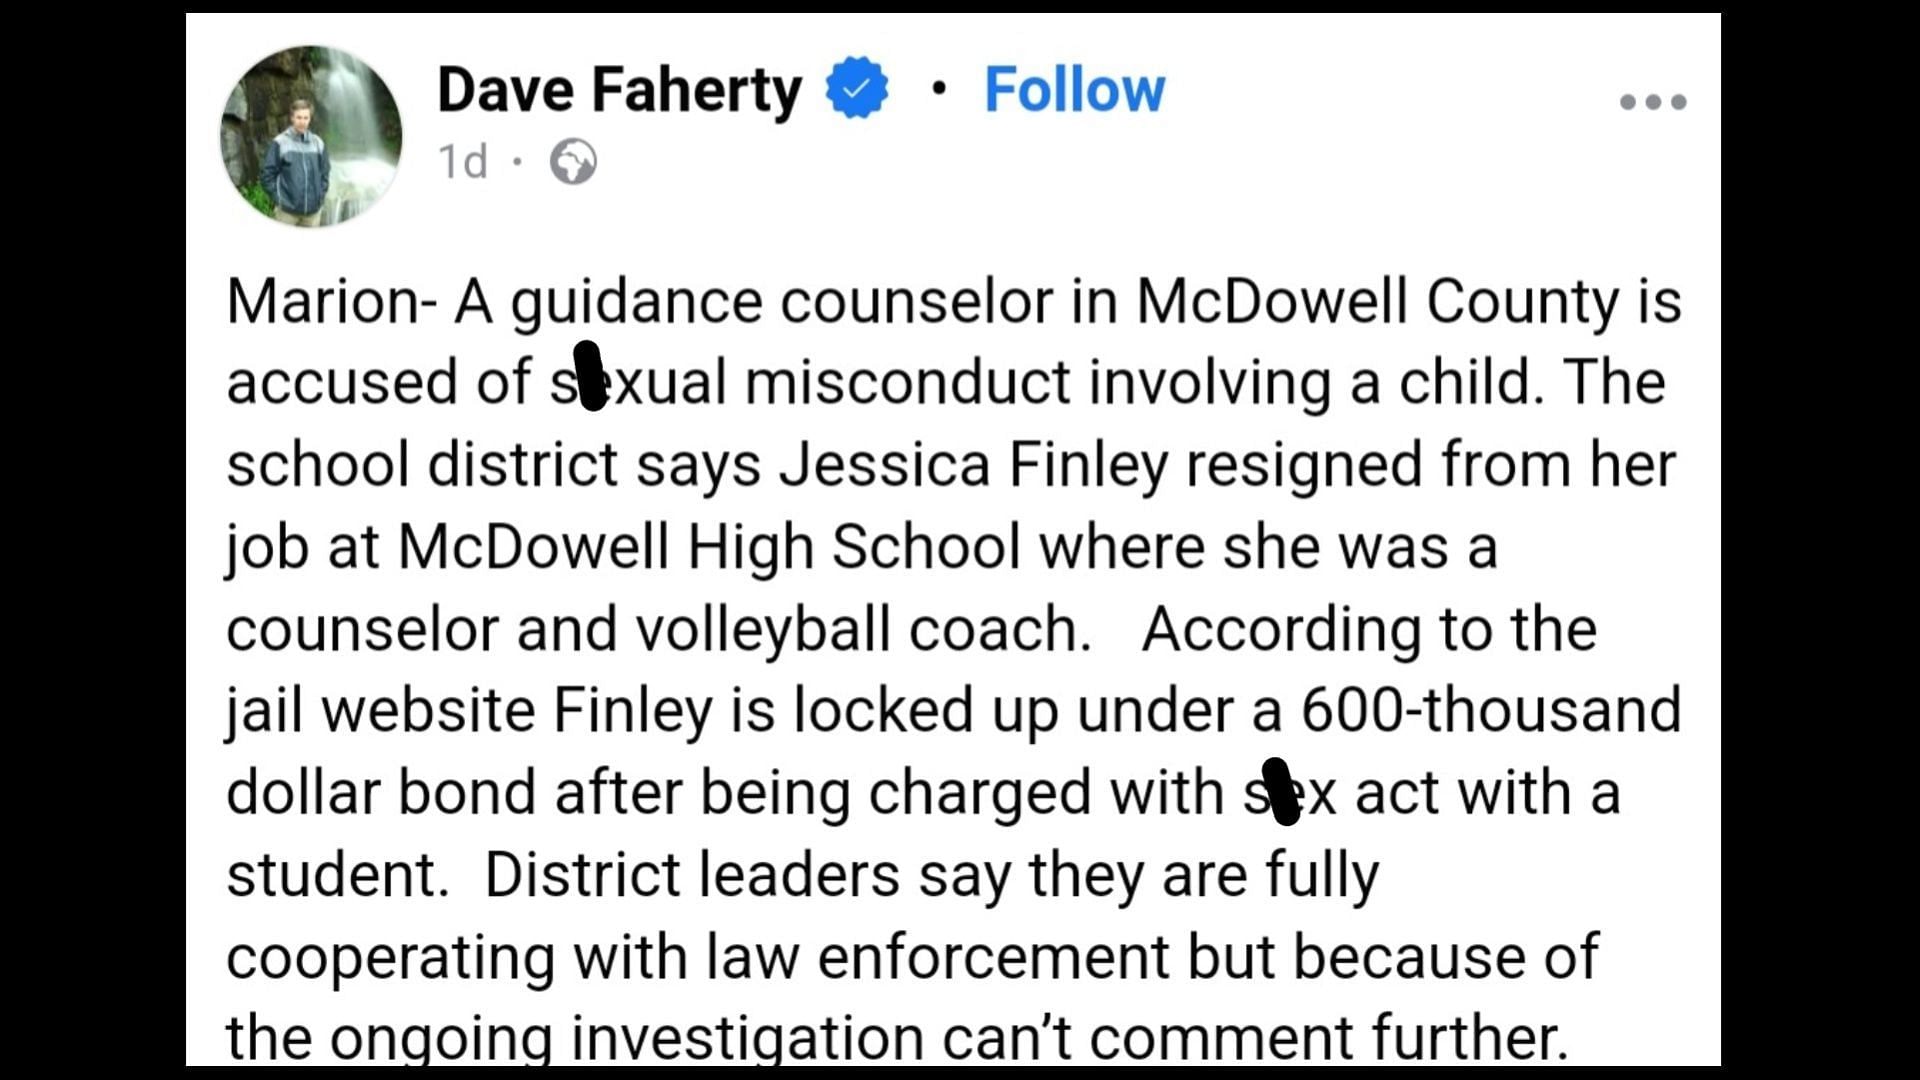 Finley was a guidance counselor at McDowell High School (Image via Facebook/Dave Faherty)